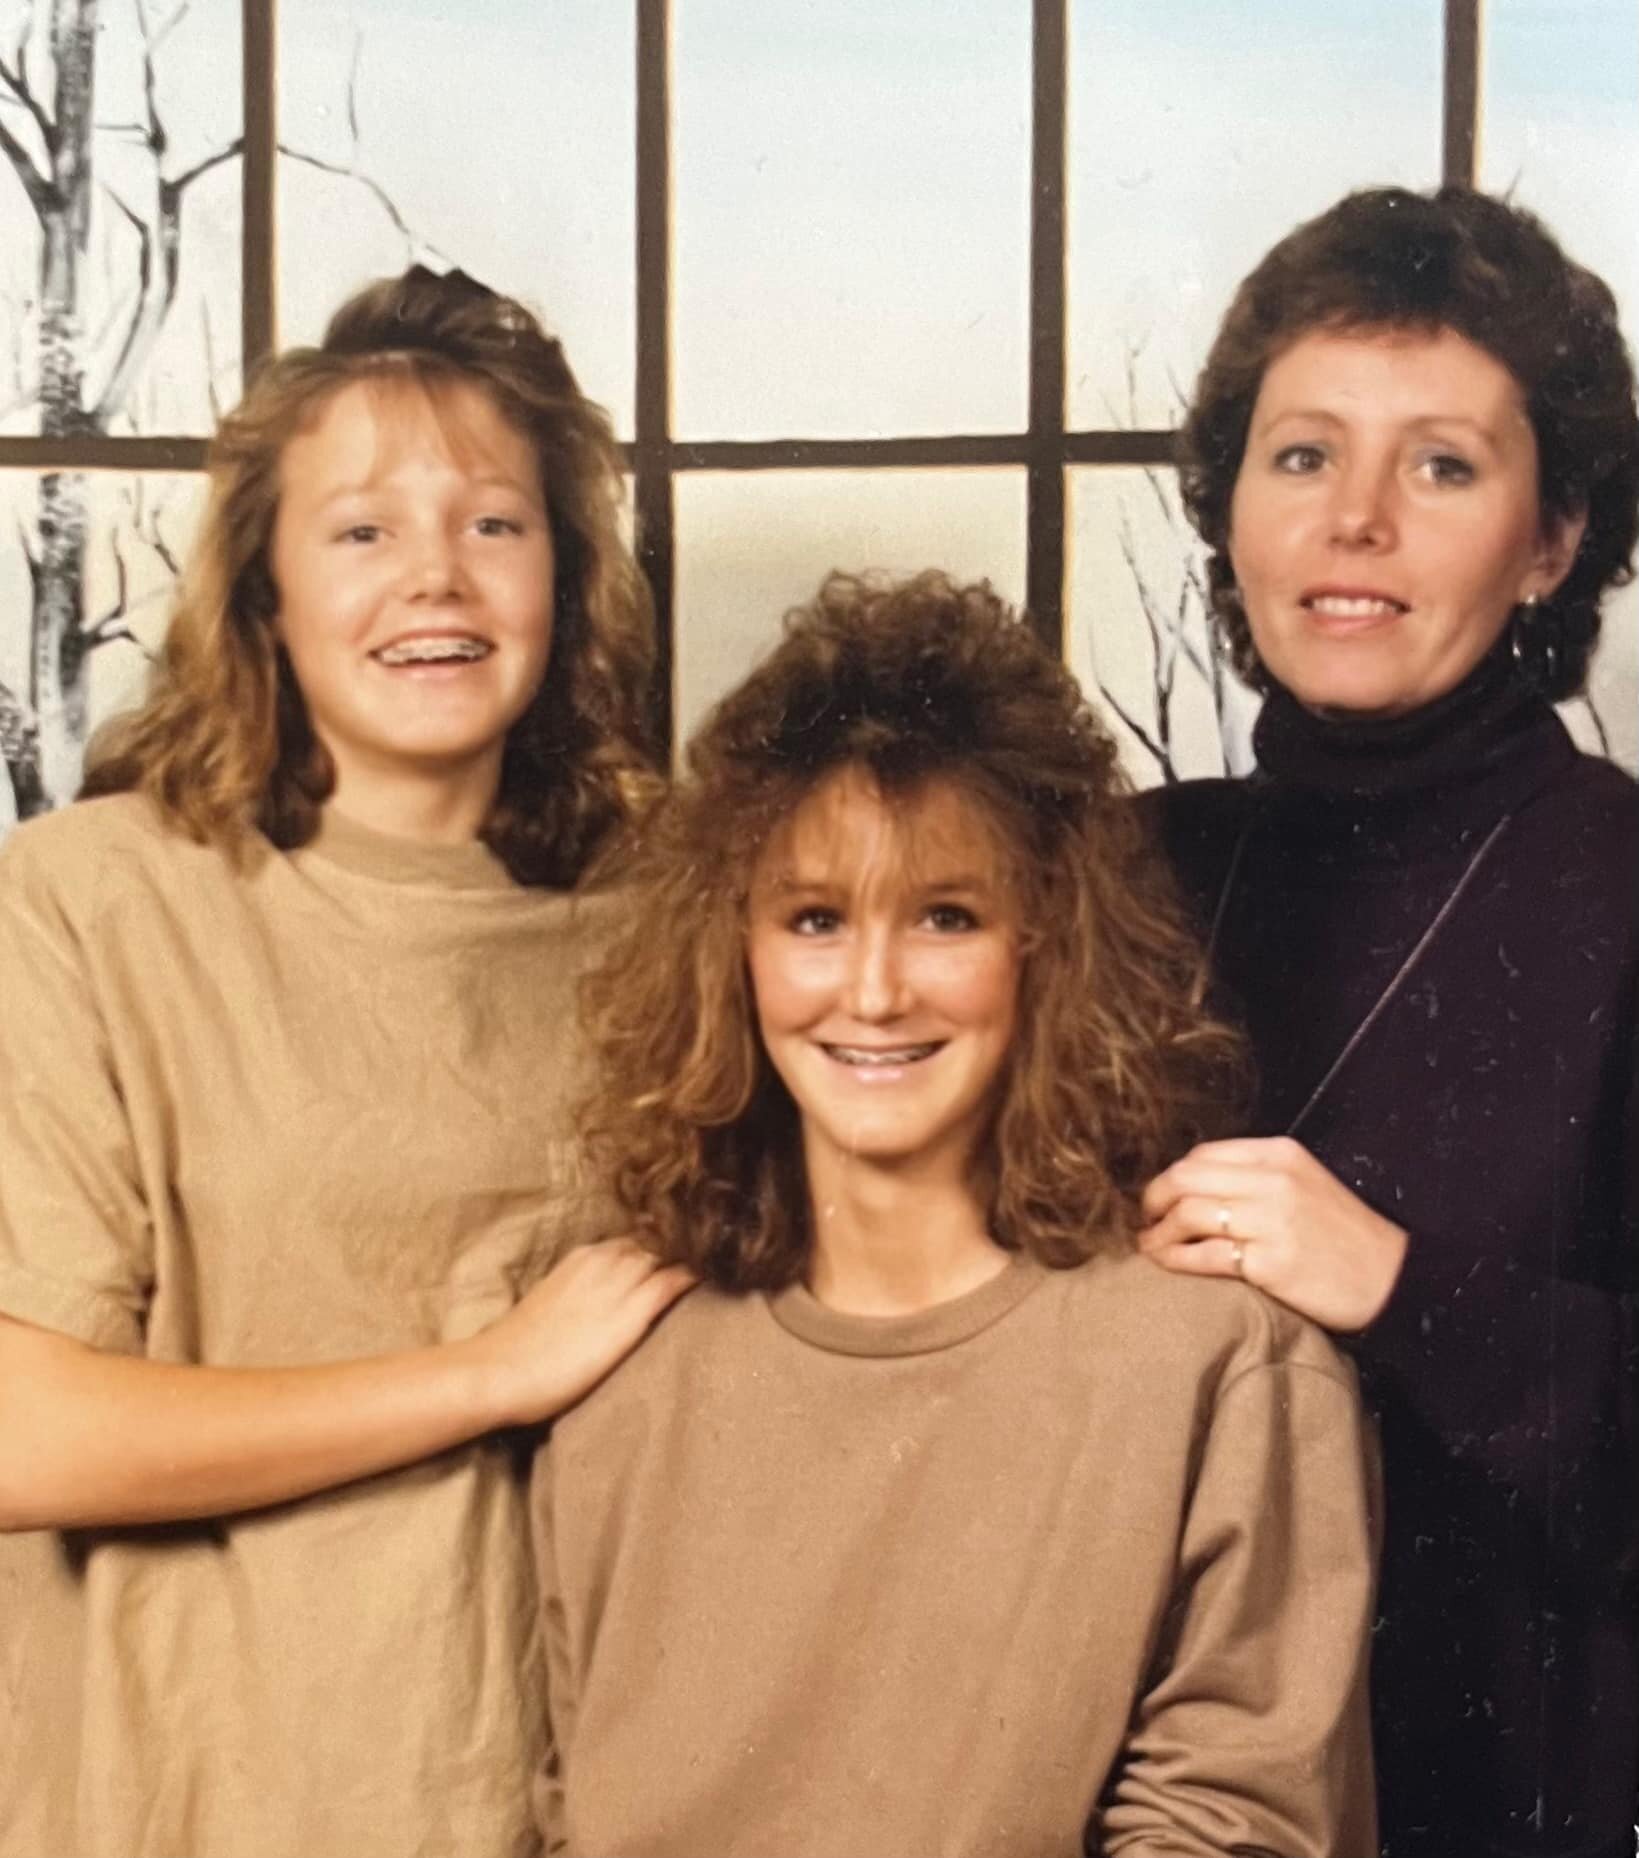 Happy birthday to my glamorous mom! Our ultimate cheerleader and radiant nana. I love you, and I'm guessing the Sears portrait photographer put me in the middle to showcase that magnificent mane of hair 😂 Thank You to the 80&rsquo;s for this unforge